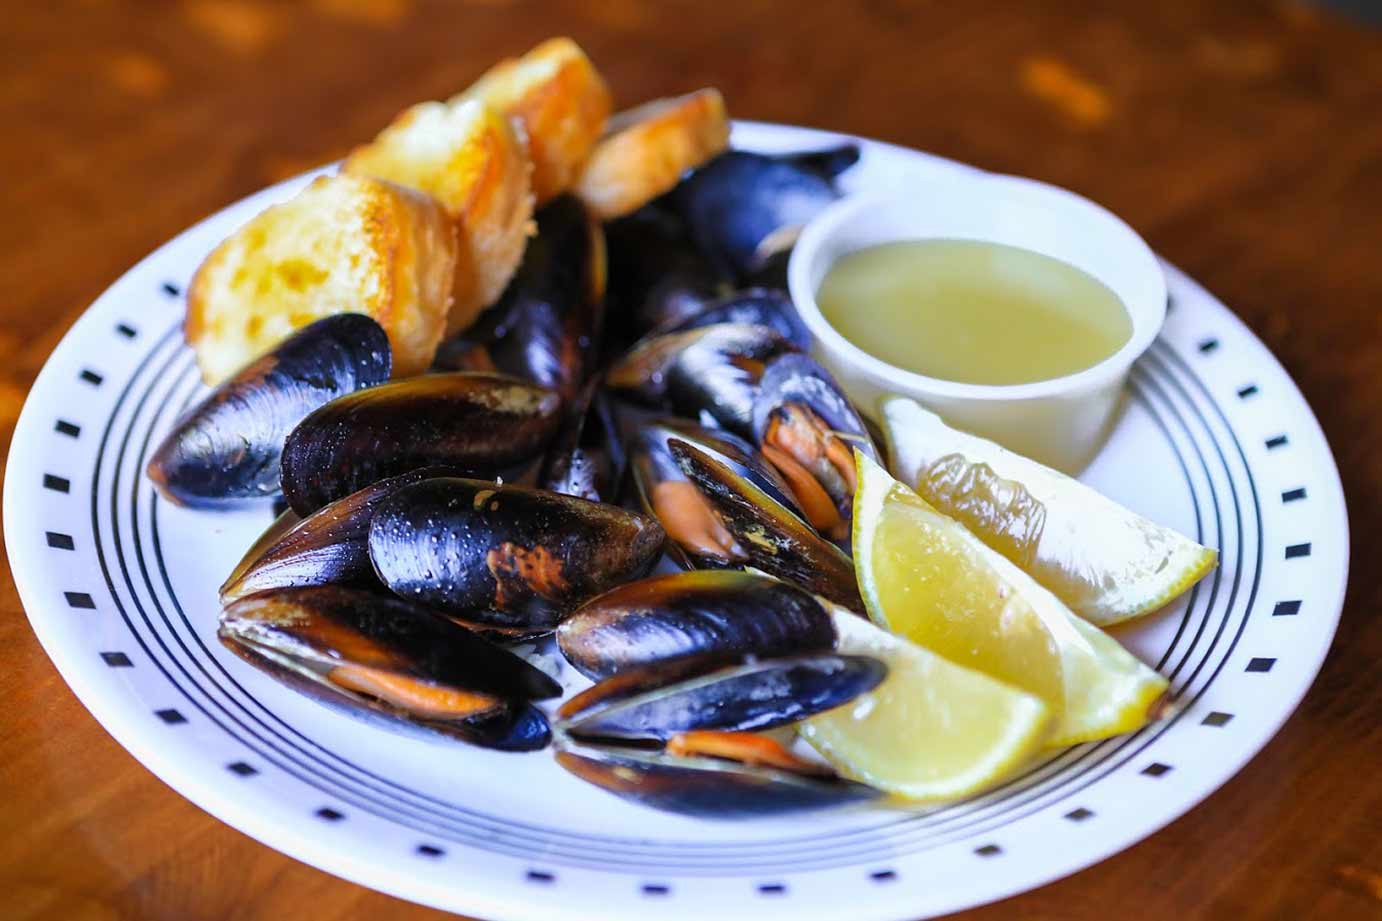 Mussels with lemon